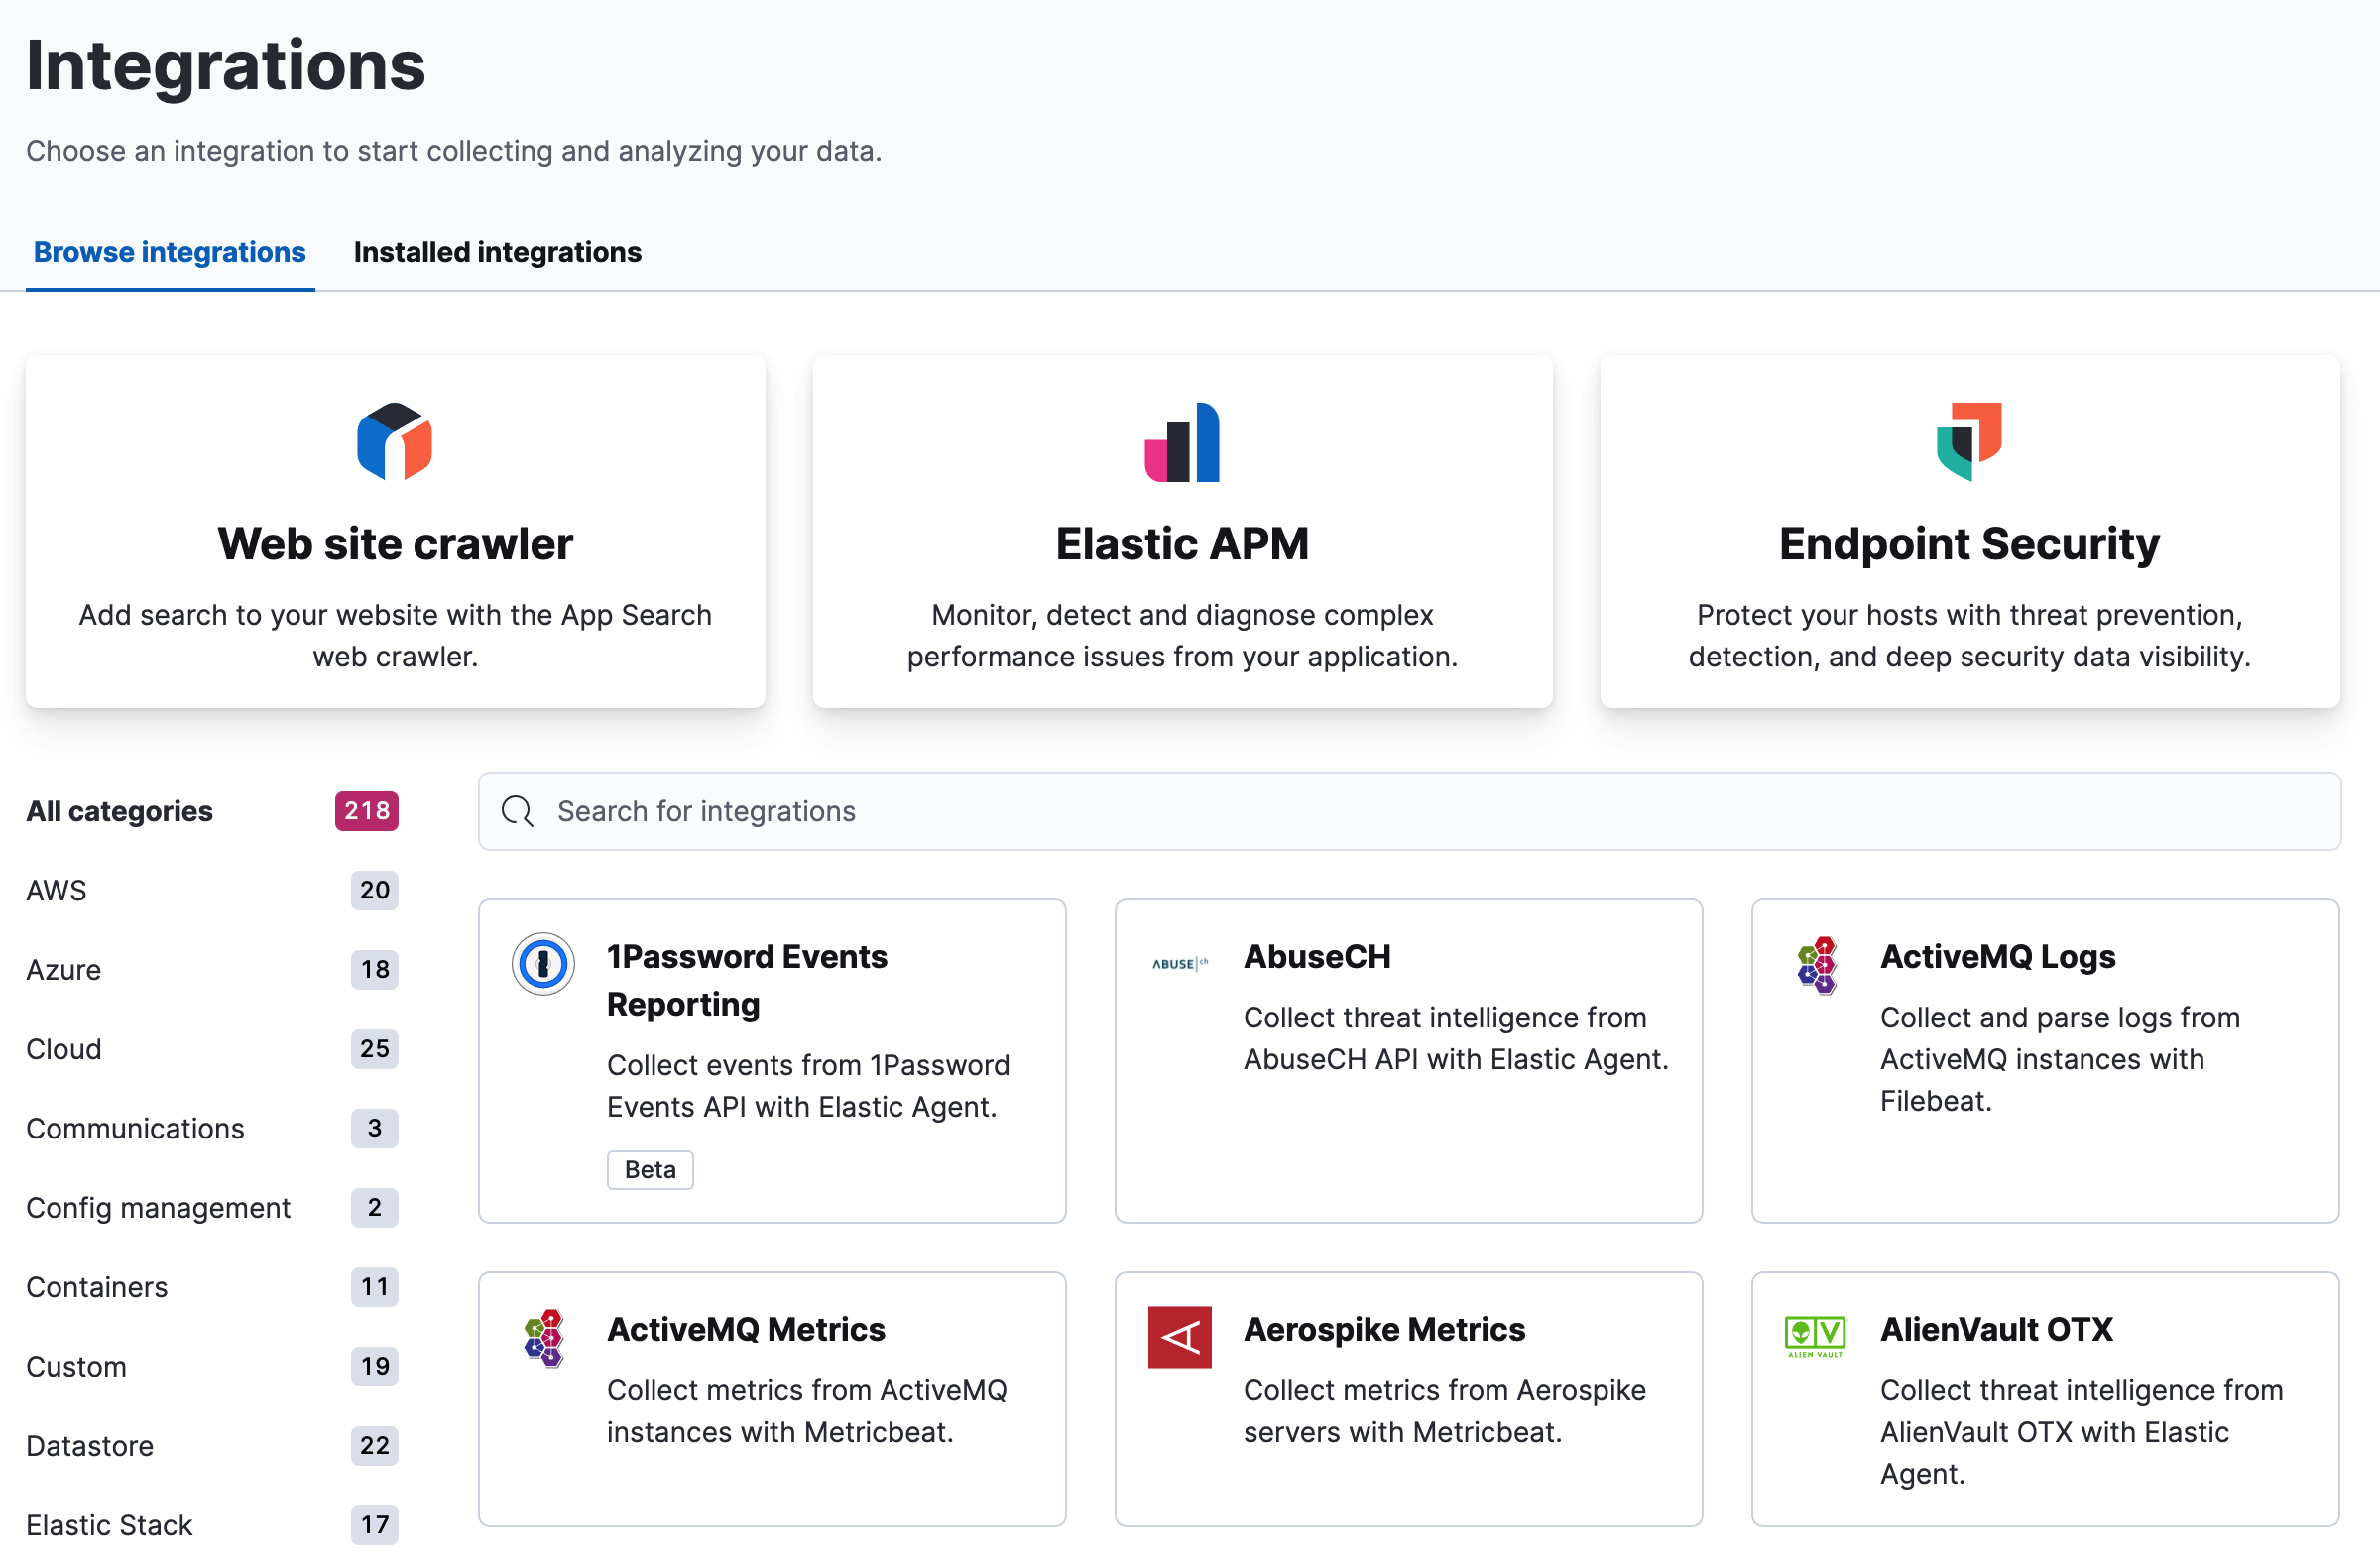 Integrations page from which you can choose integrations to start collecting and analyzing data